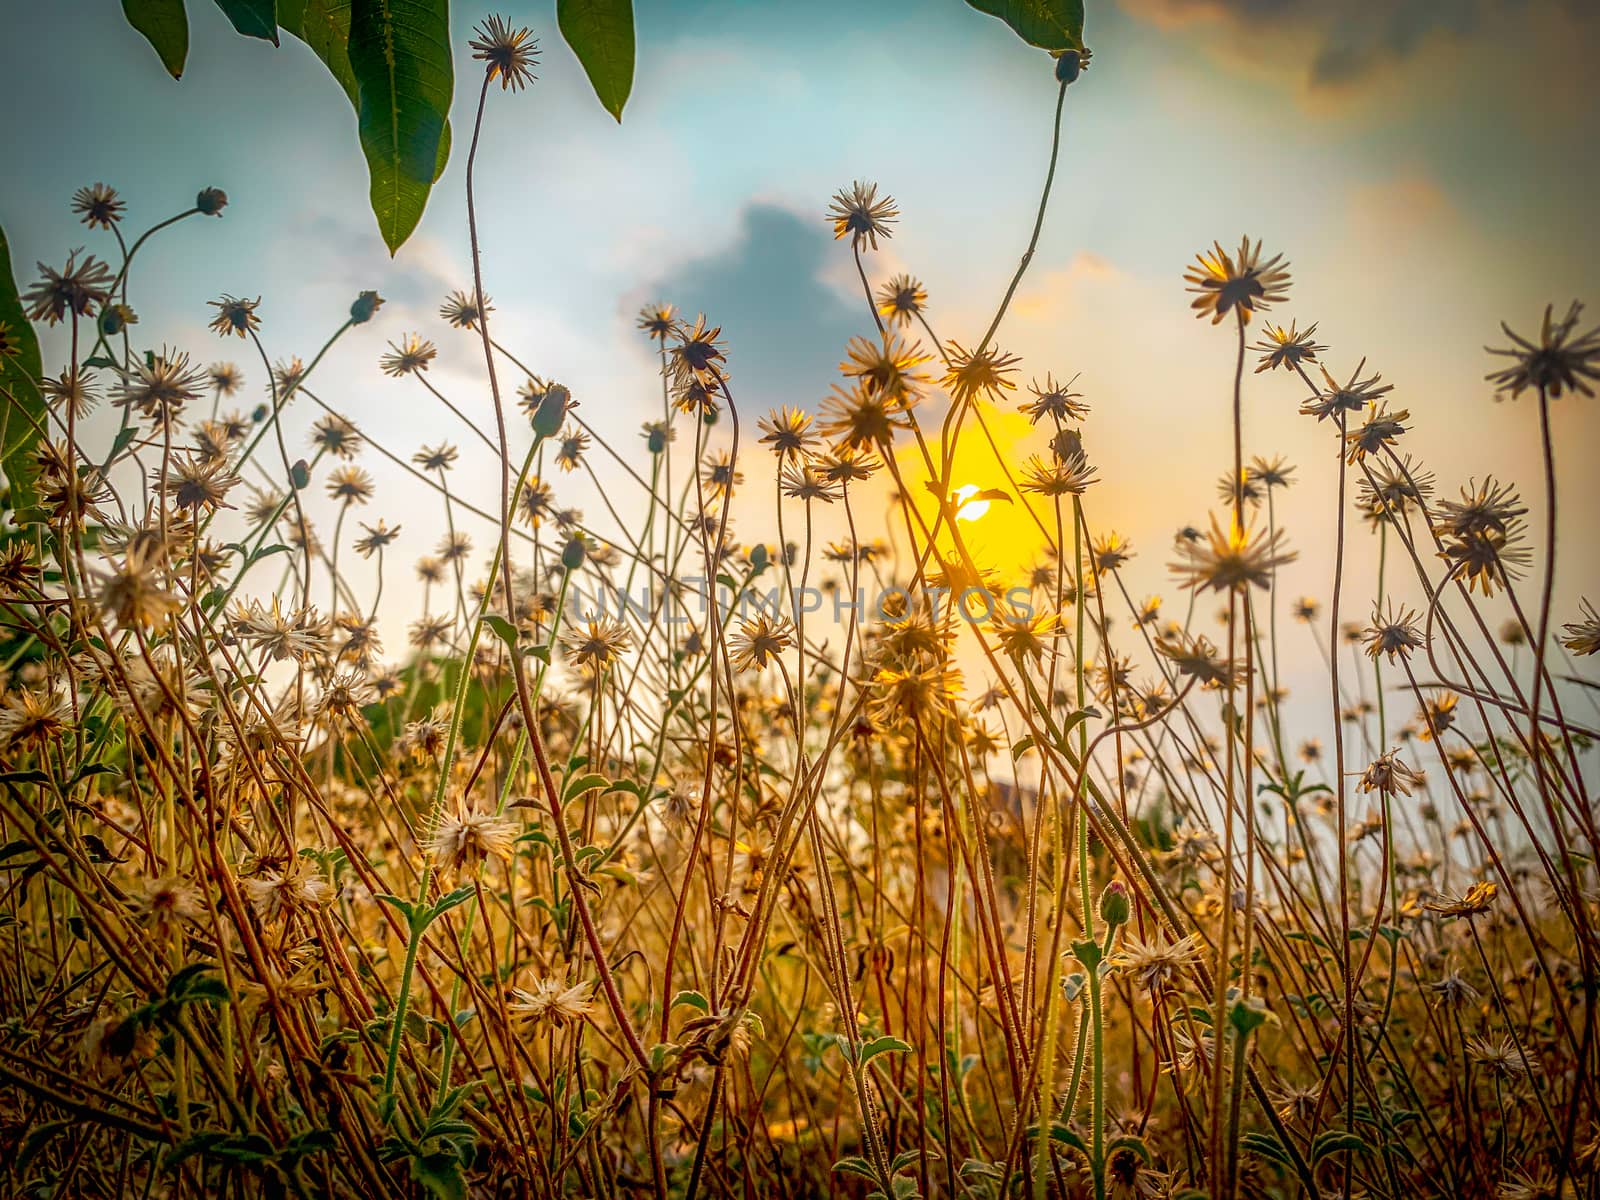 Grass and sun flower in the evening by STZU